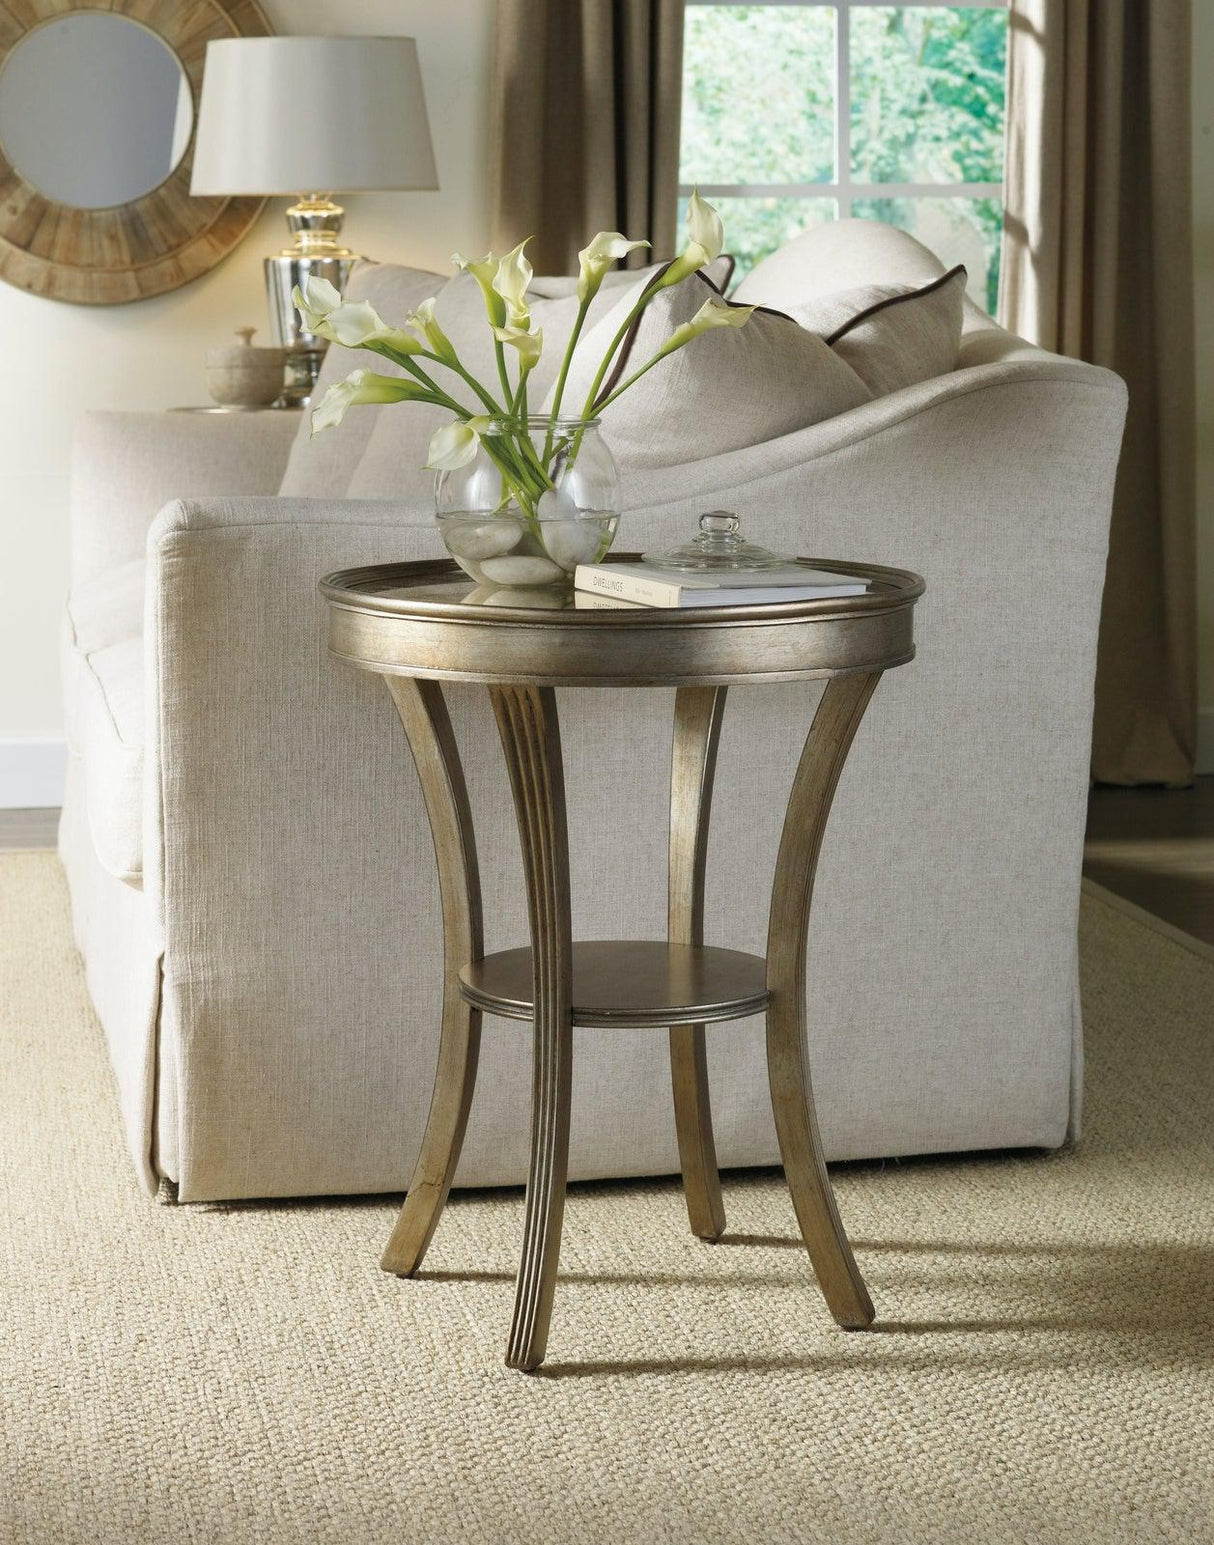 Hooker Furniture Sanctuary Round Mirrored Accent Table